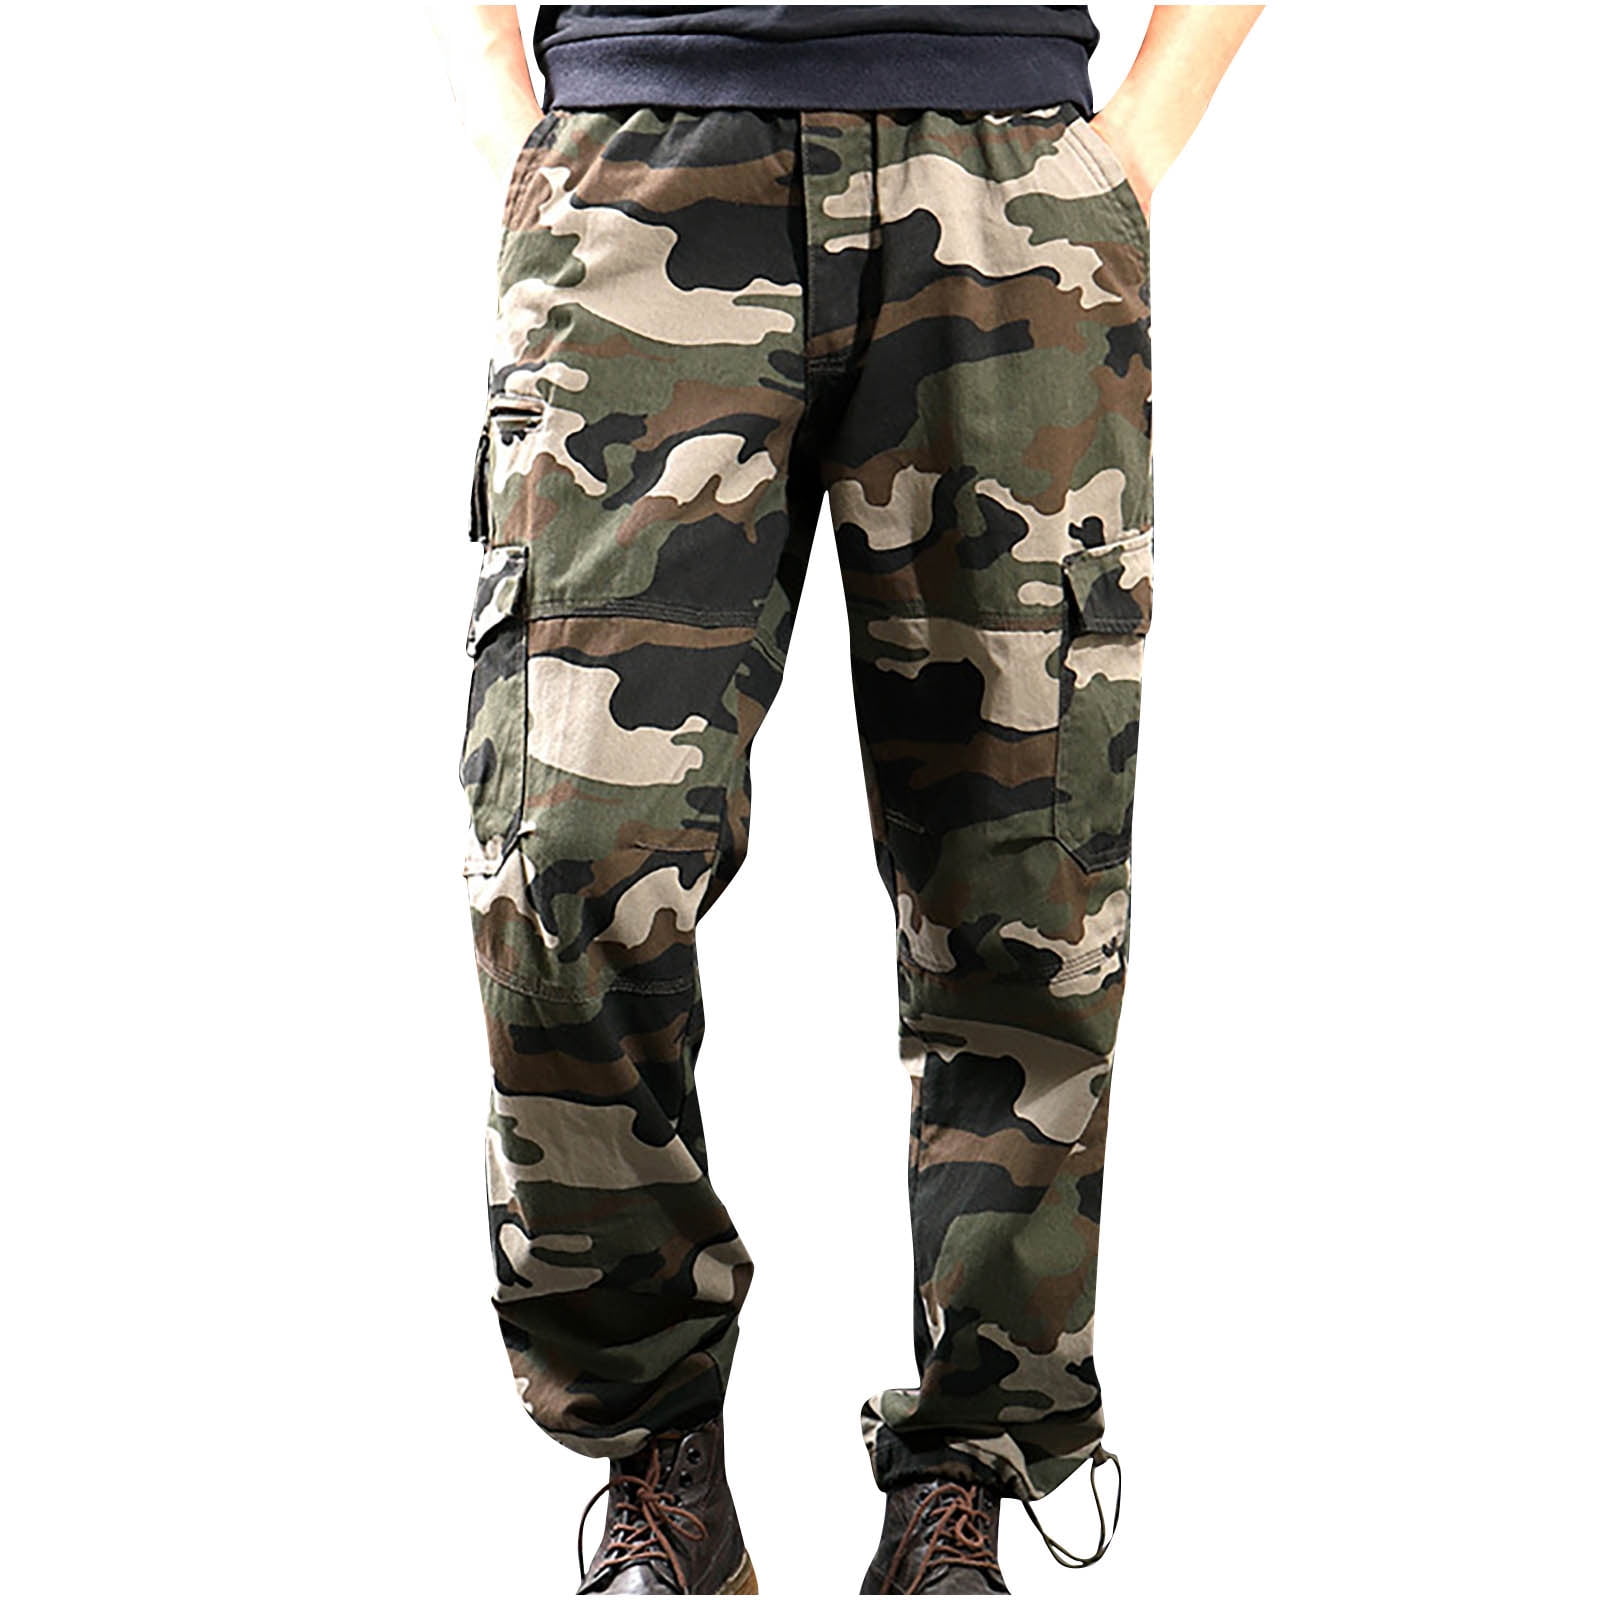 RYRJJ Camouflage Cargo Pants for Men Slim Causal Work Trousers Outdoor  Fishing Hiking Travel Pant Multi Pockets(Camouflage Gray,4XL) 